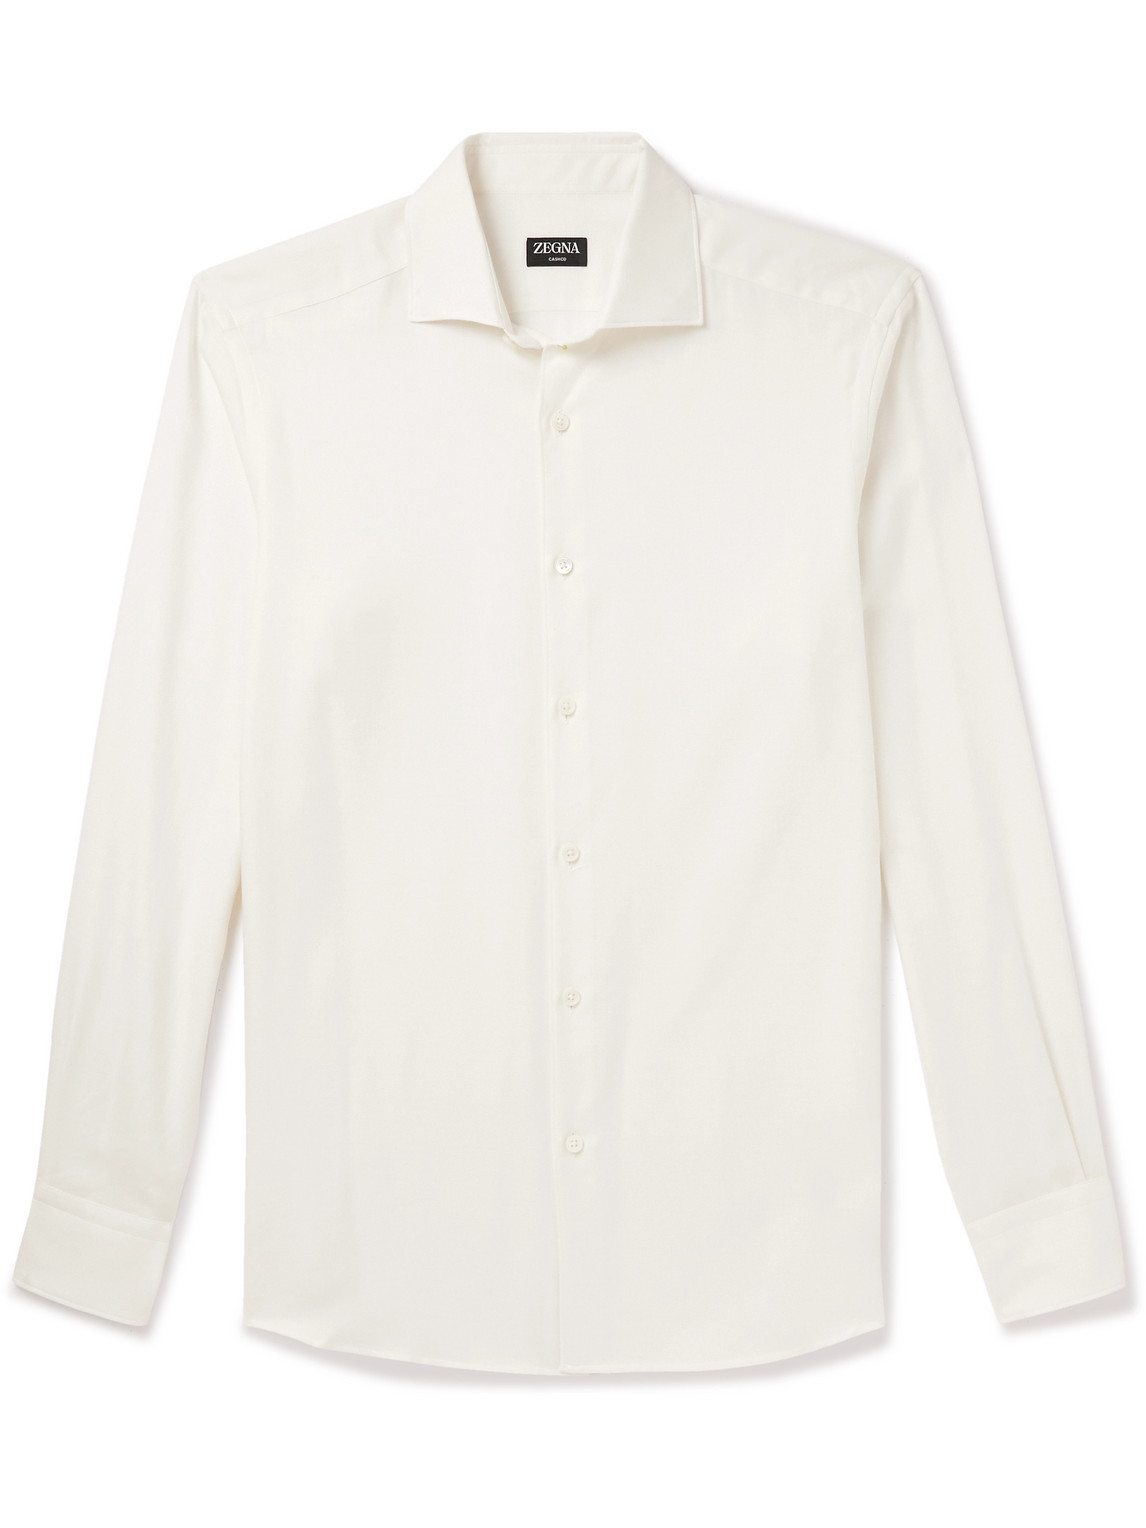 Zegna Cotton And Cashmere-blend Twill Shirt In White